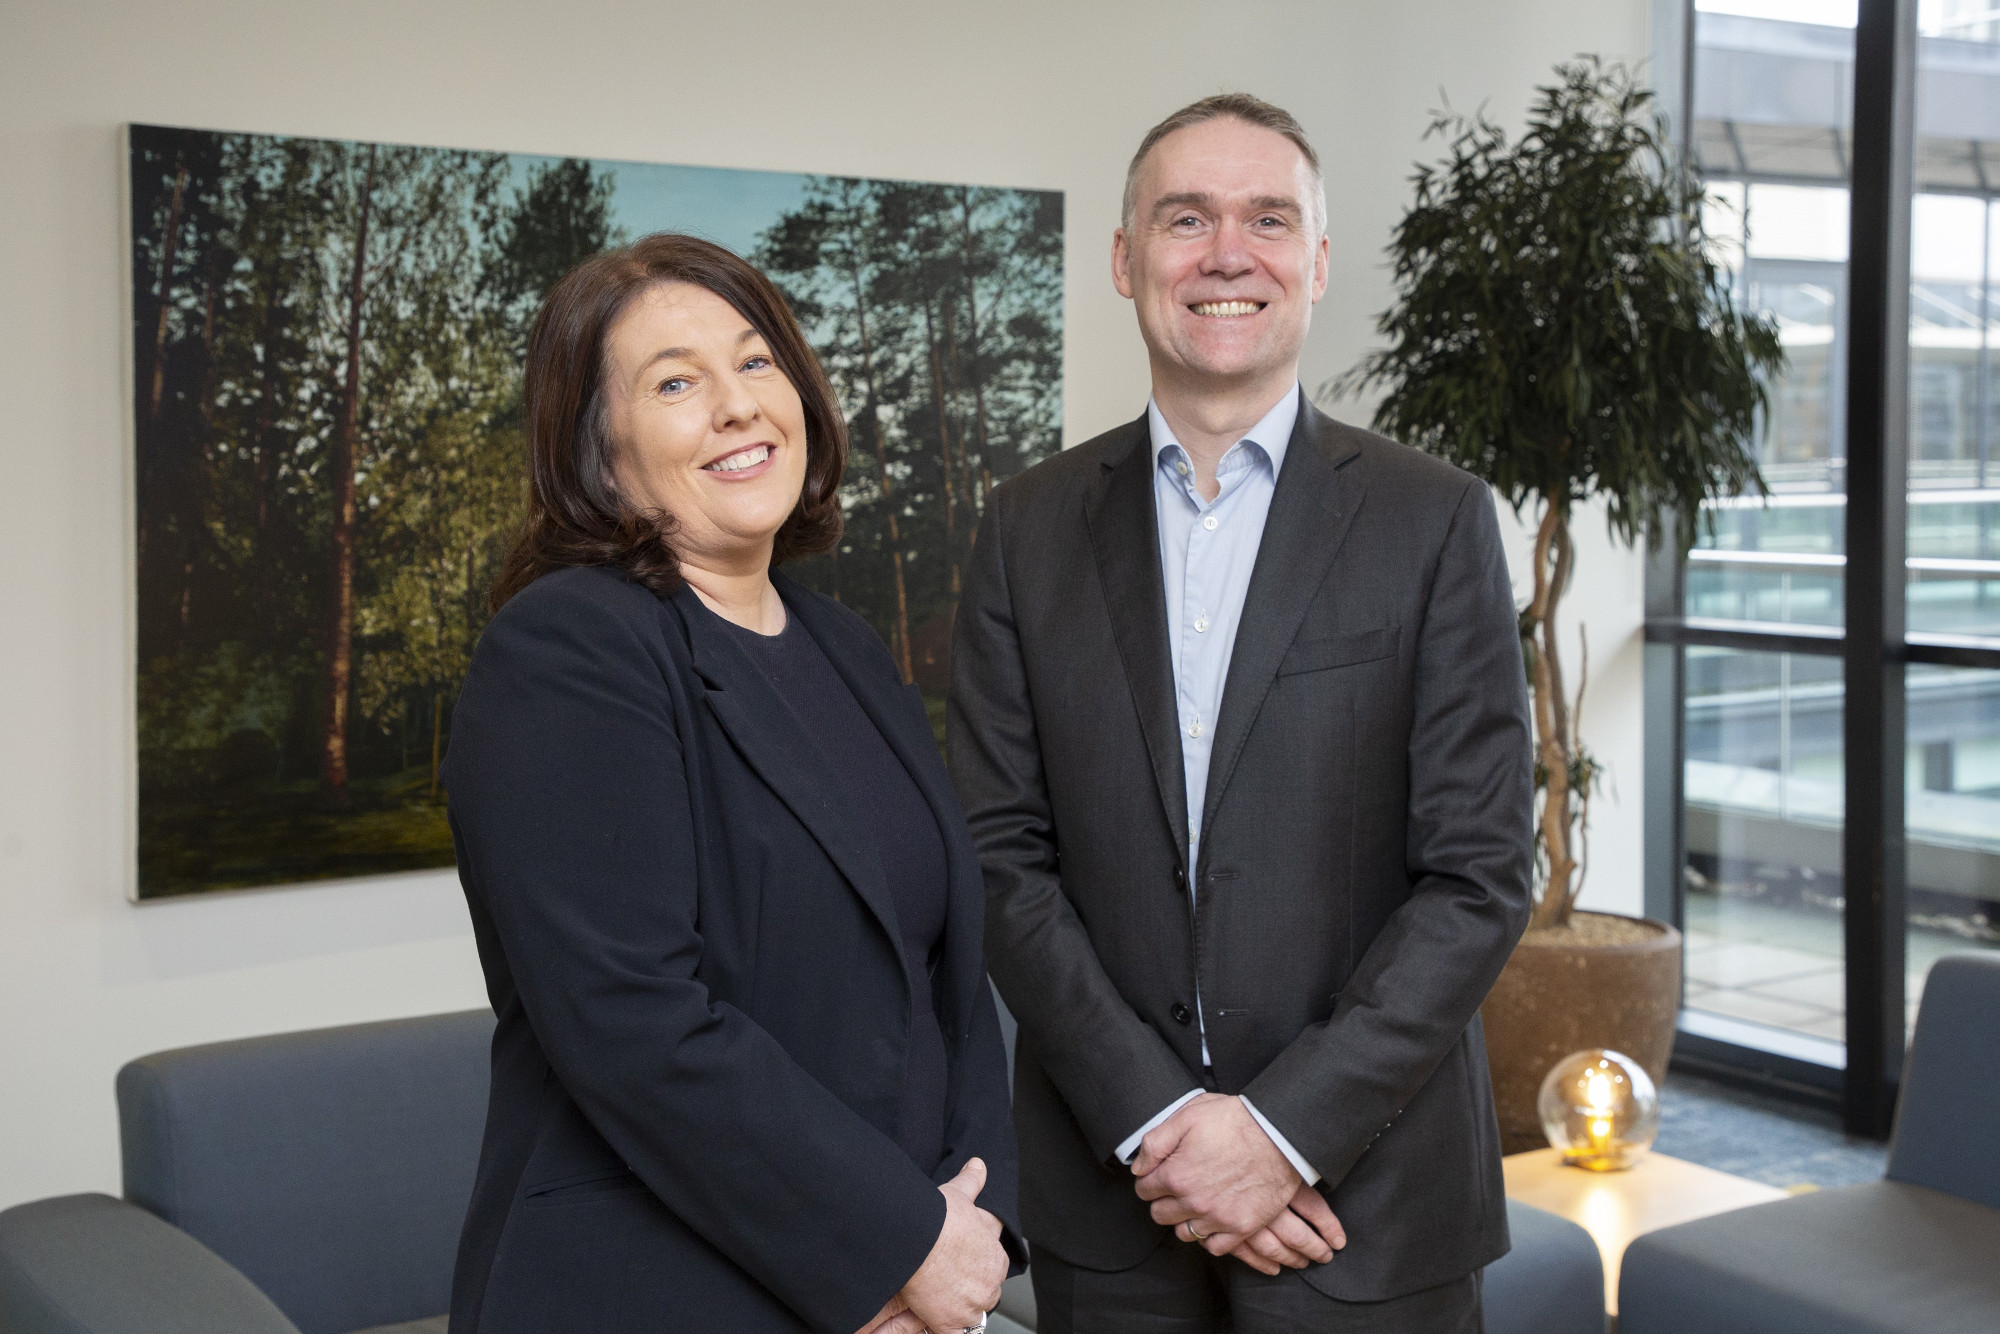 Philip Lee appoints Eimear Collins as new dispute resolution and litigation partner